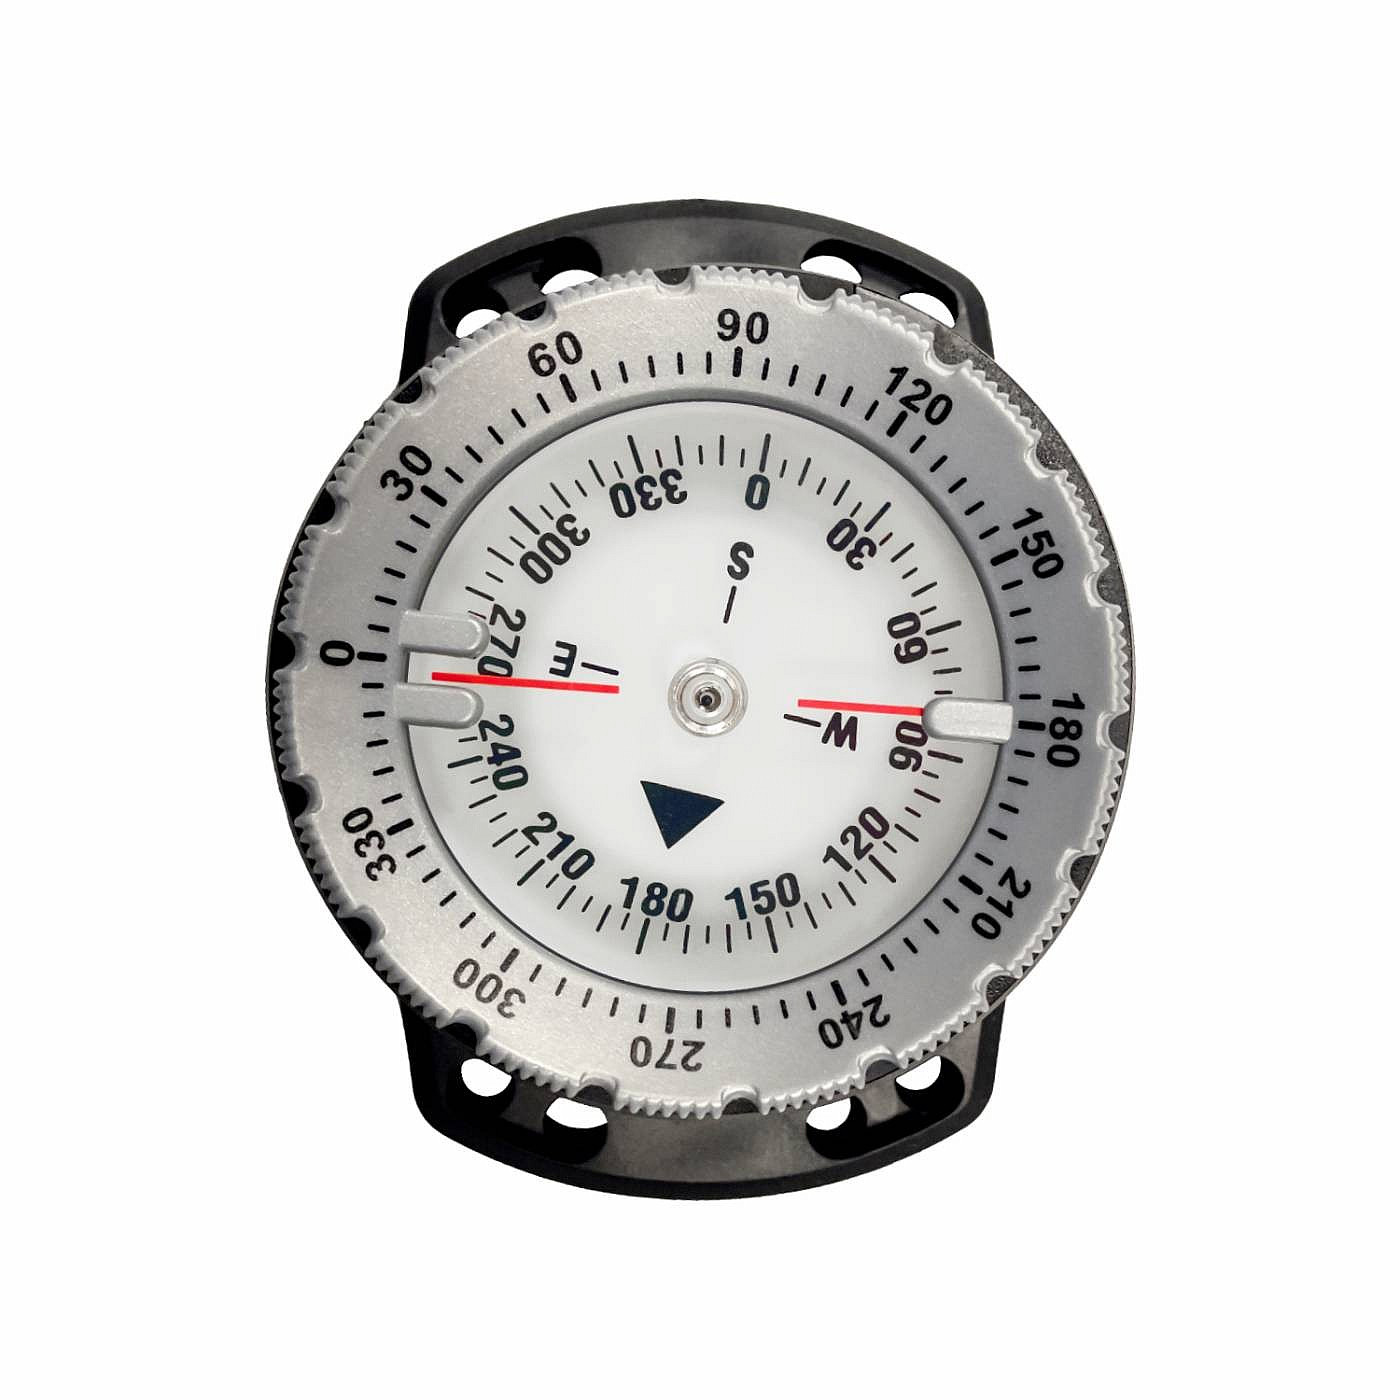 Suunto sports watches, dive products, compasses and accessories